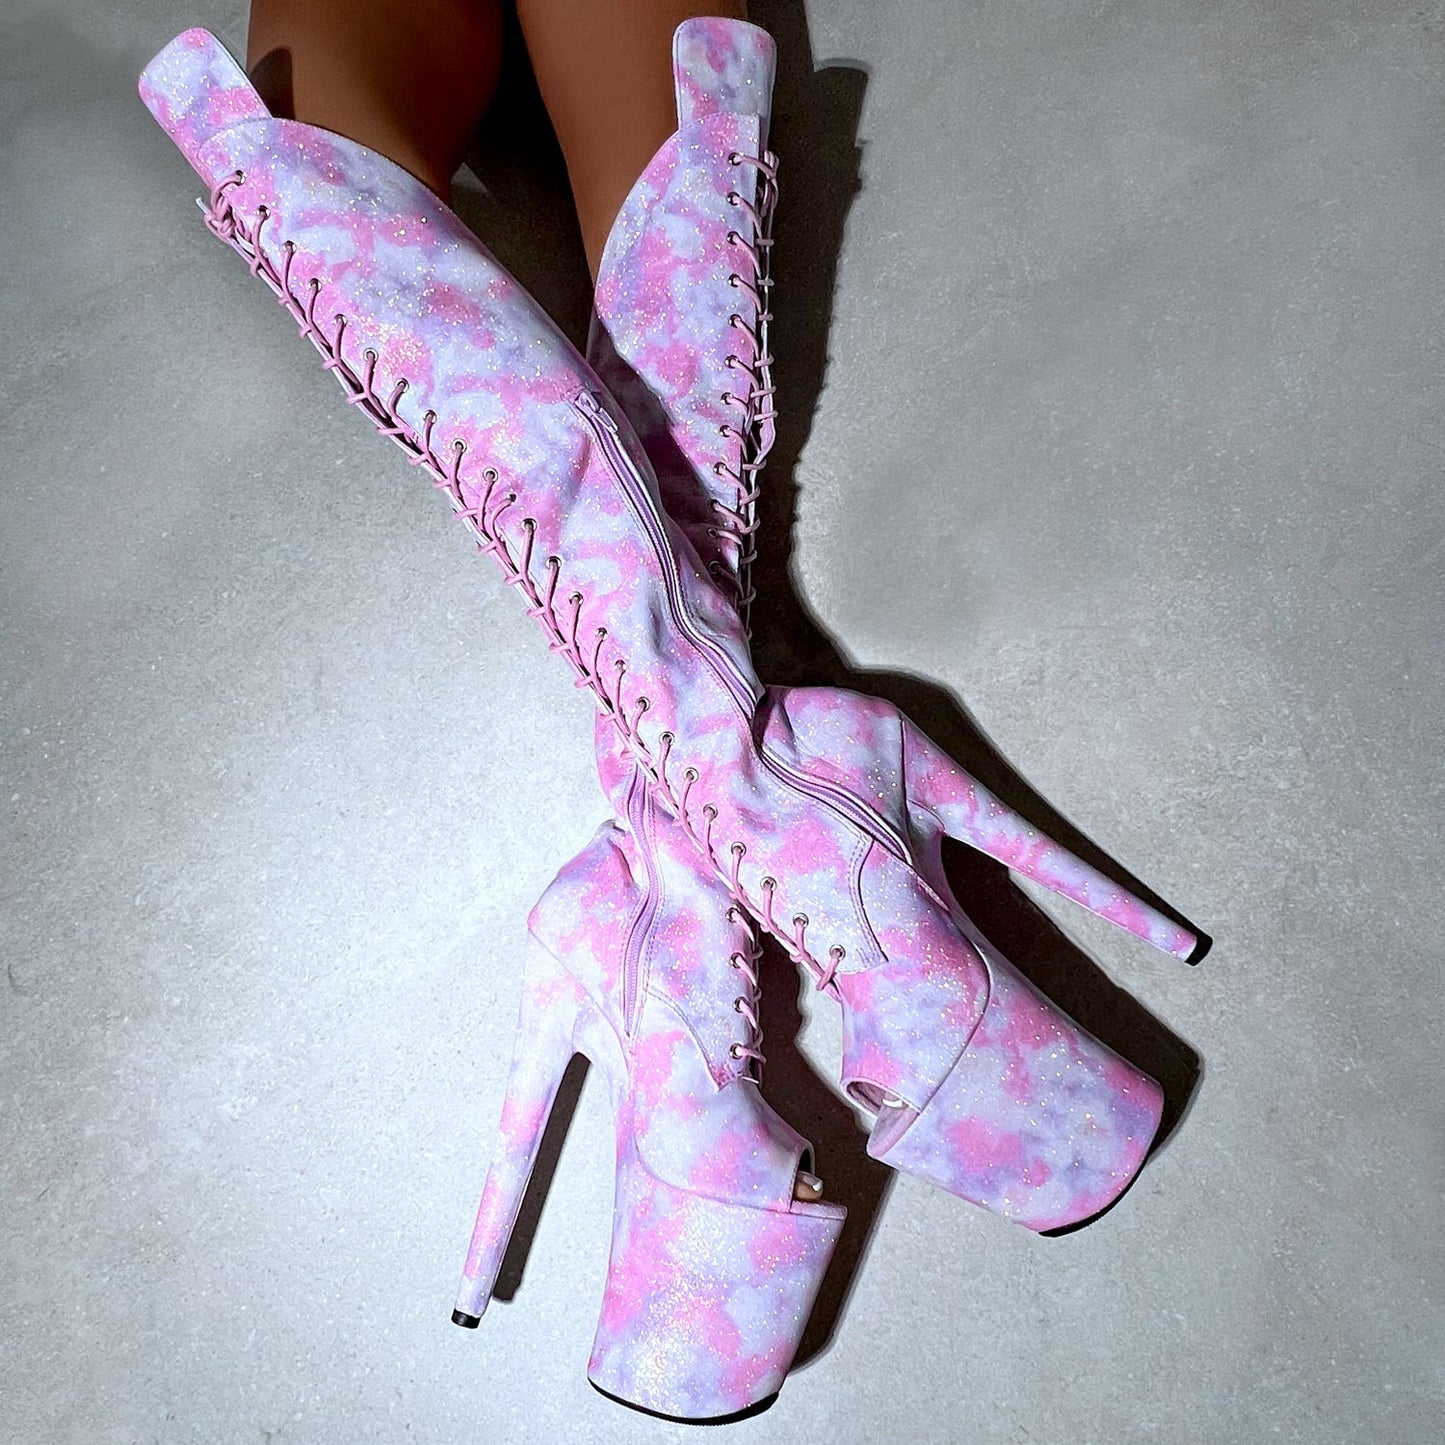 Fairy Clouds Over Knee Open Toe Boot - Pink - 8INCH